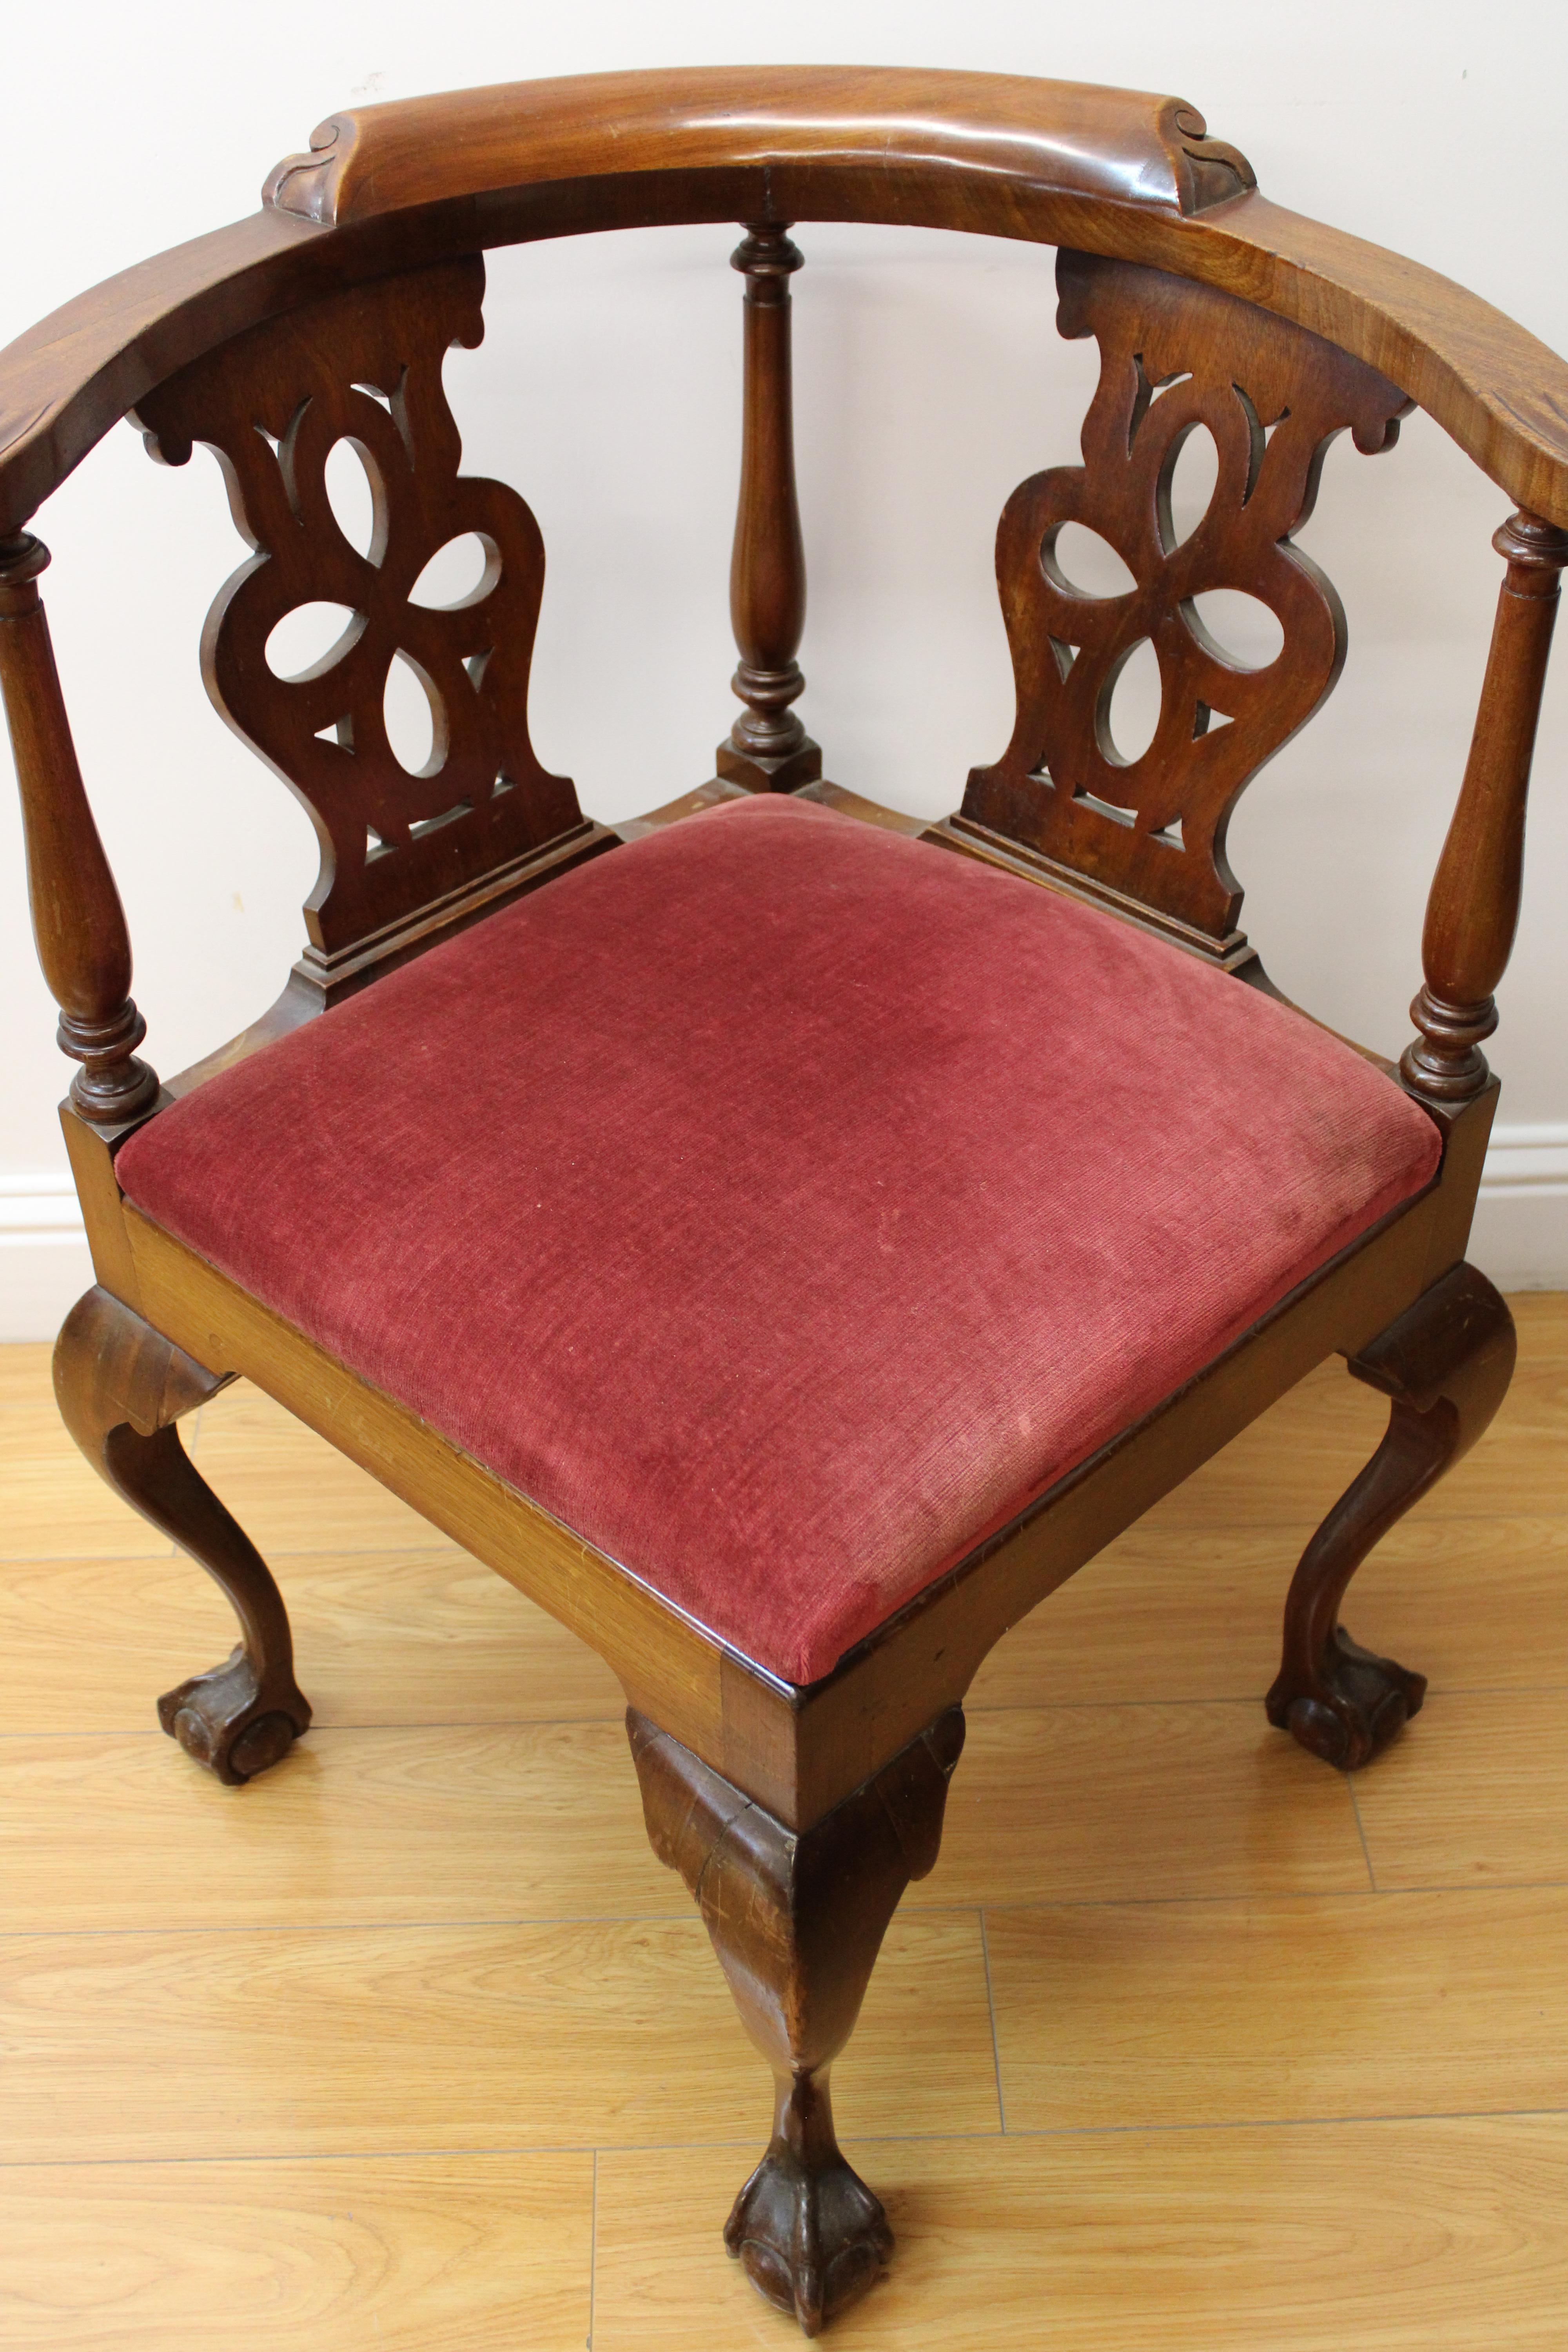 C. Late 18th century - early 19th century

Chippendale style Mohagany Corner chair w/ ball & claw feet (red velvet seat).